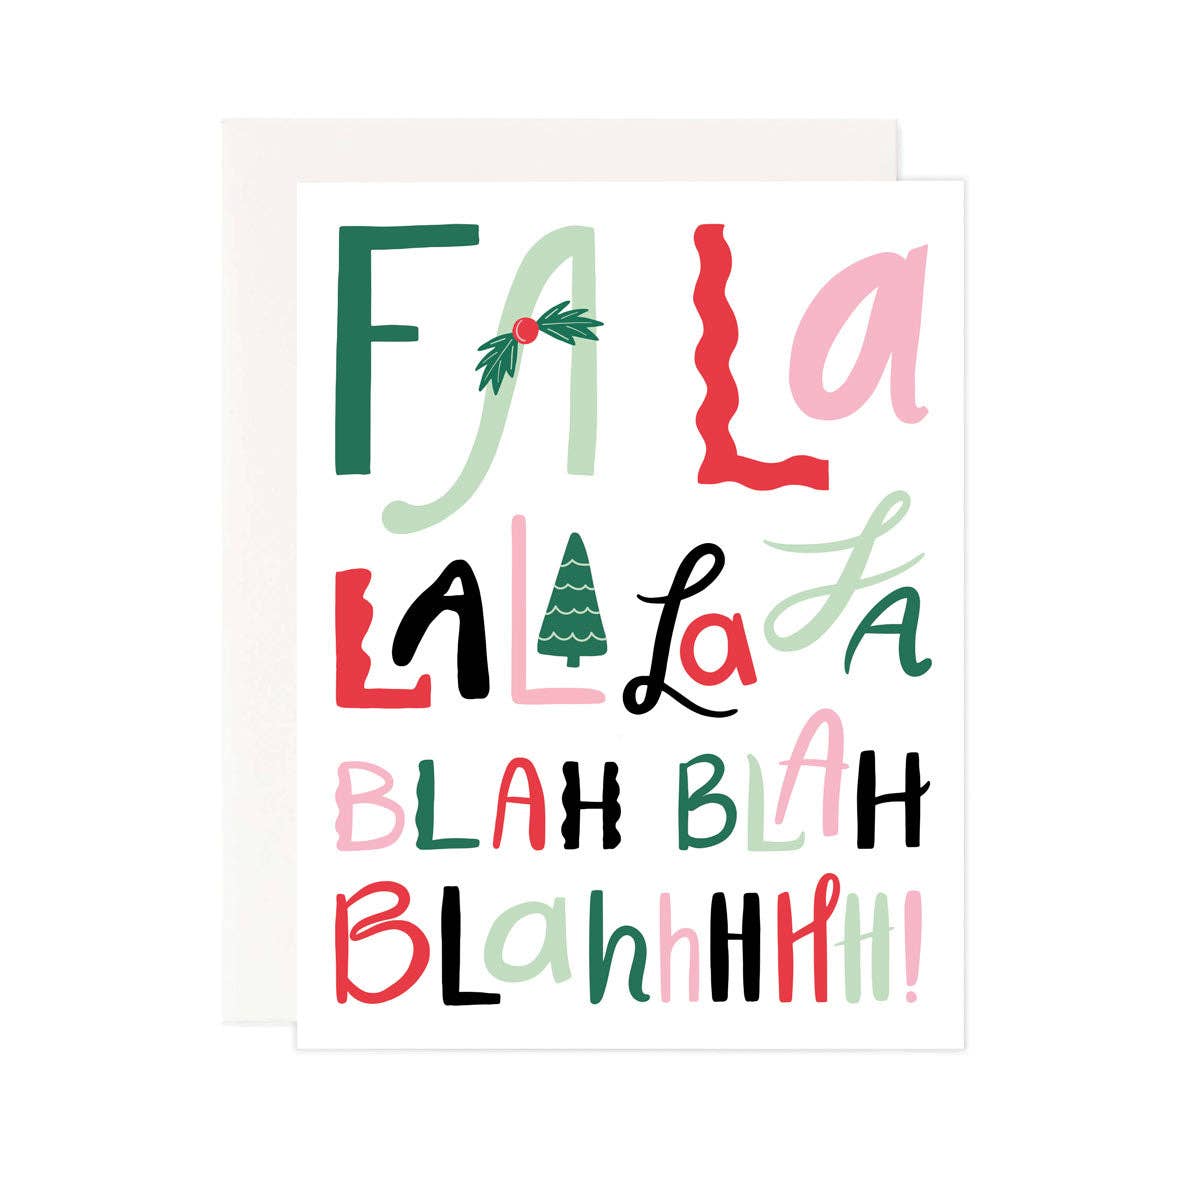 White background with text in pink, red, green, and mint says, “Fa La La la la blah blah blahhhhh!”. Envelope included.       